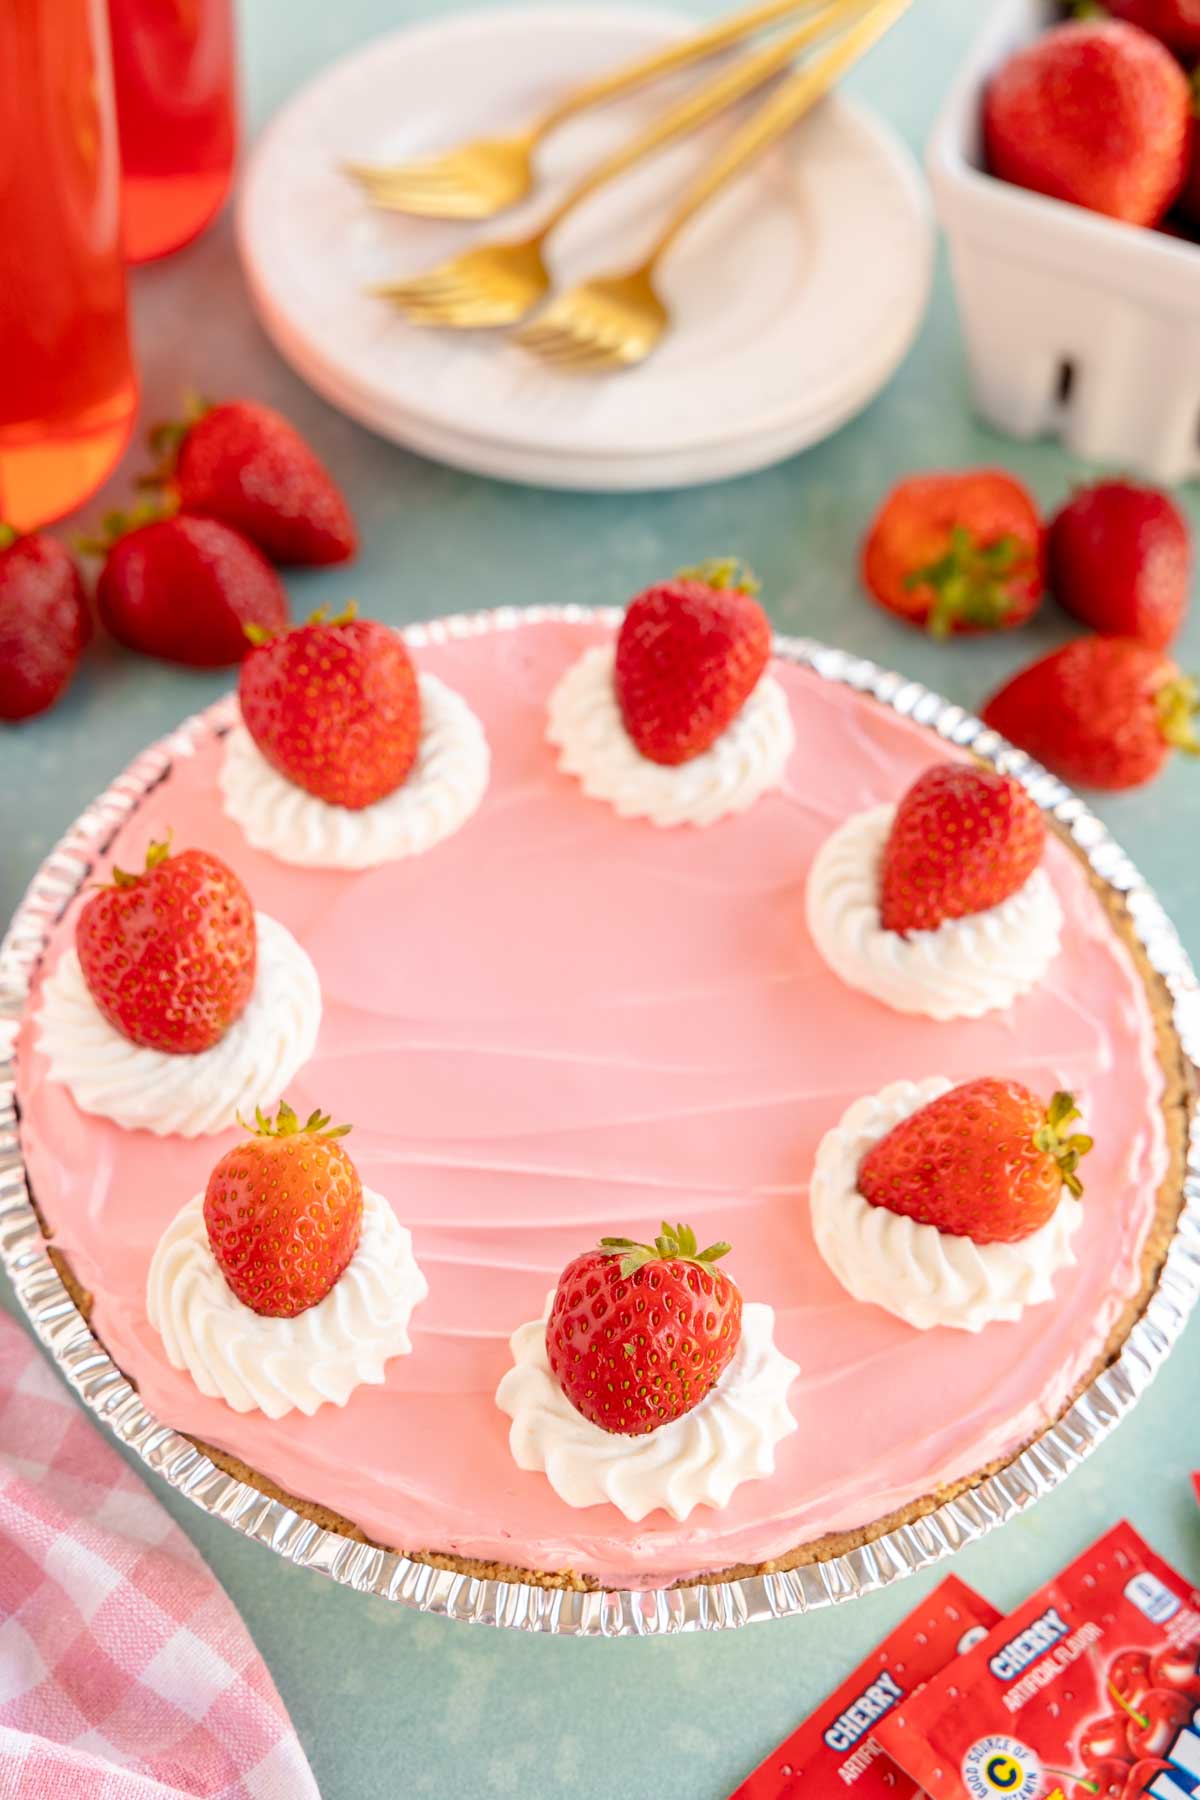 kool aid pie topped with whipped cream and strawberries